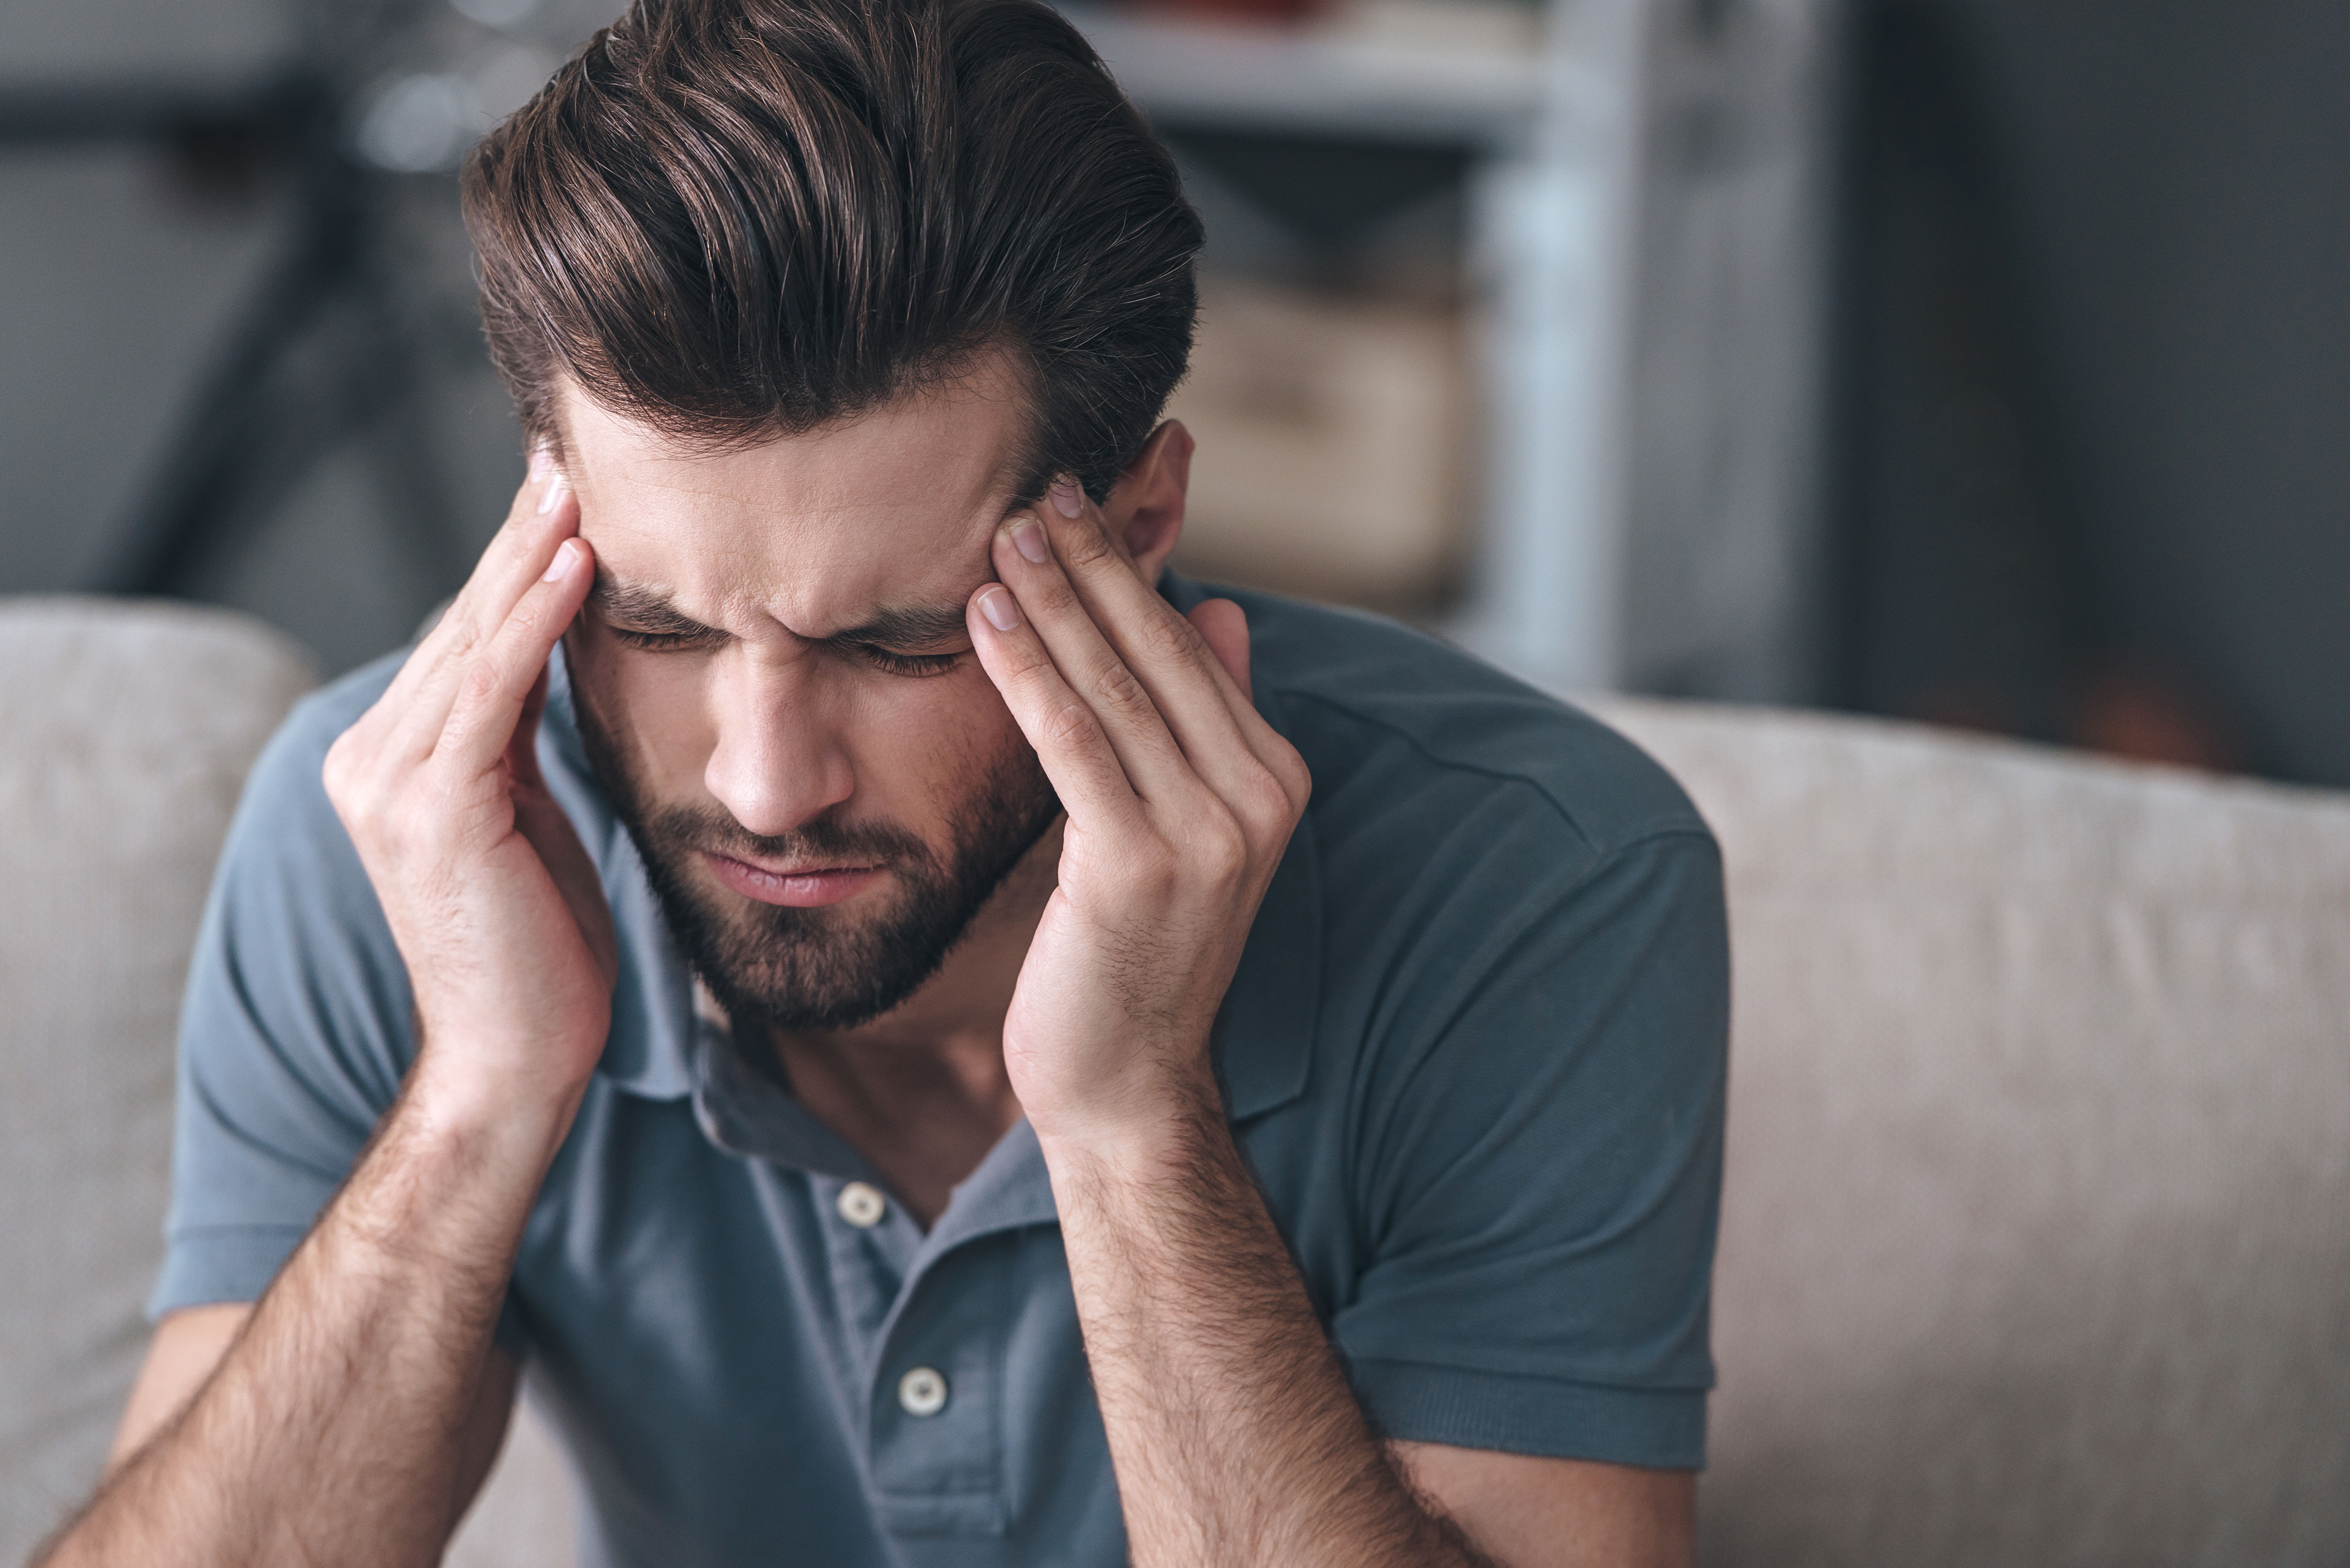 Headaches and Migraines